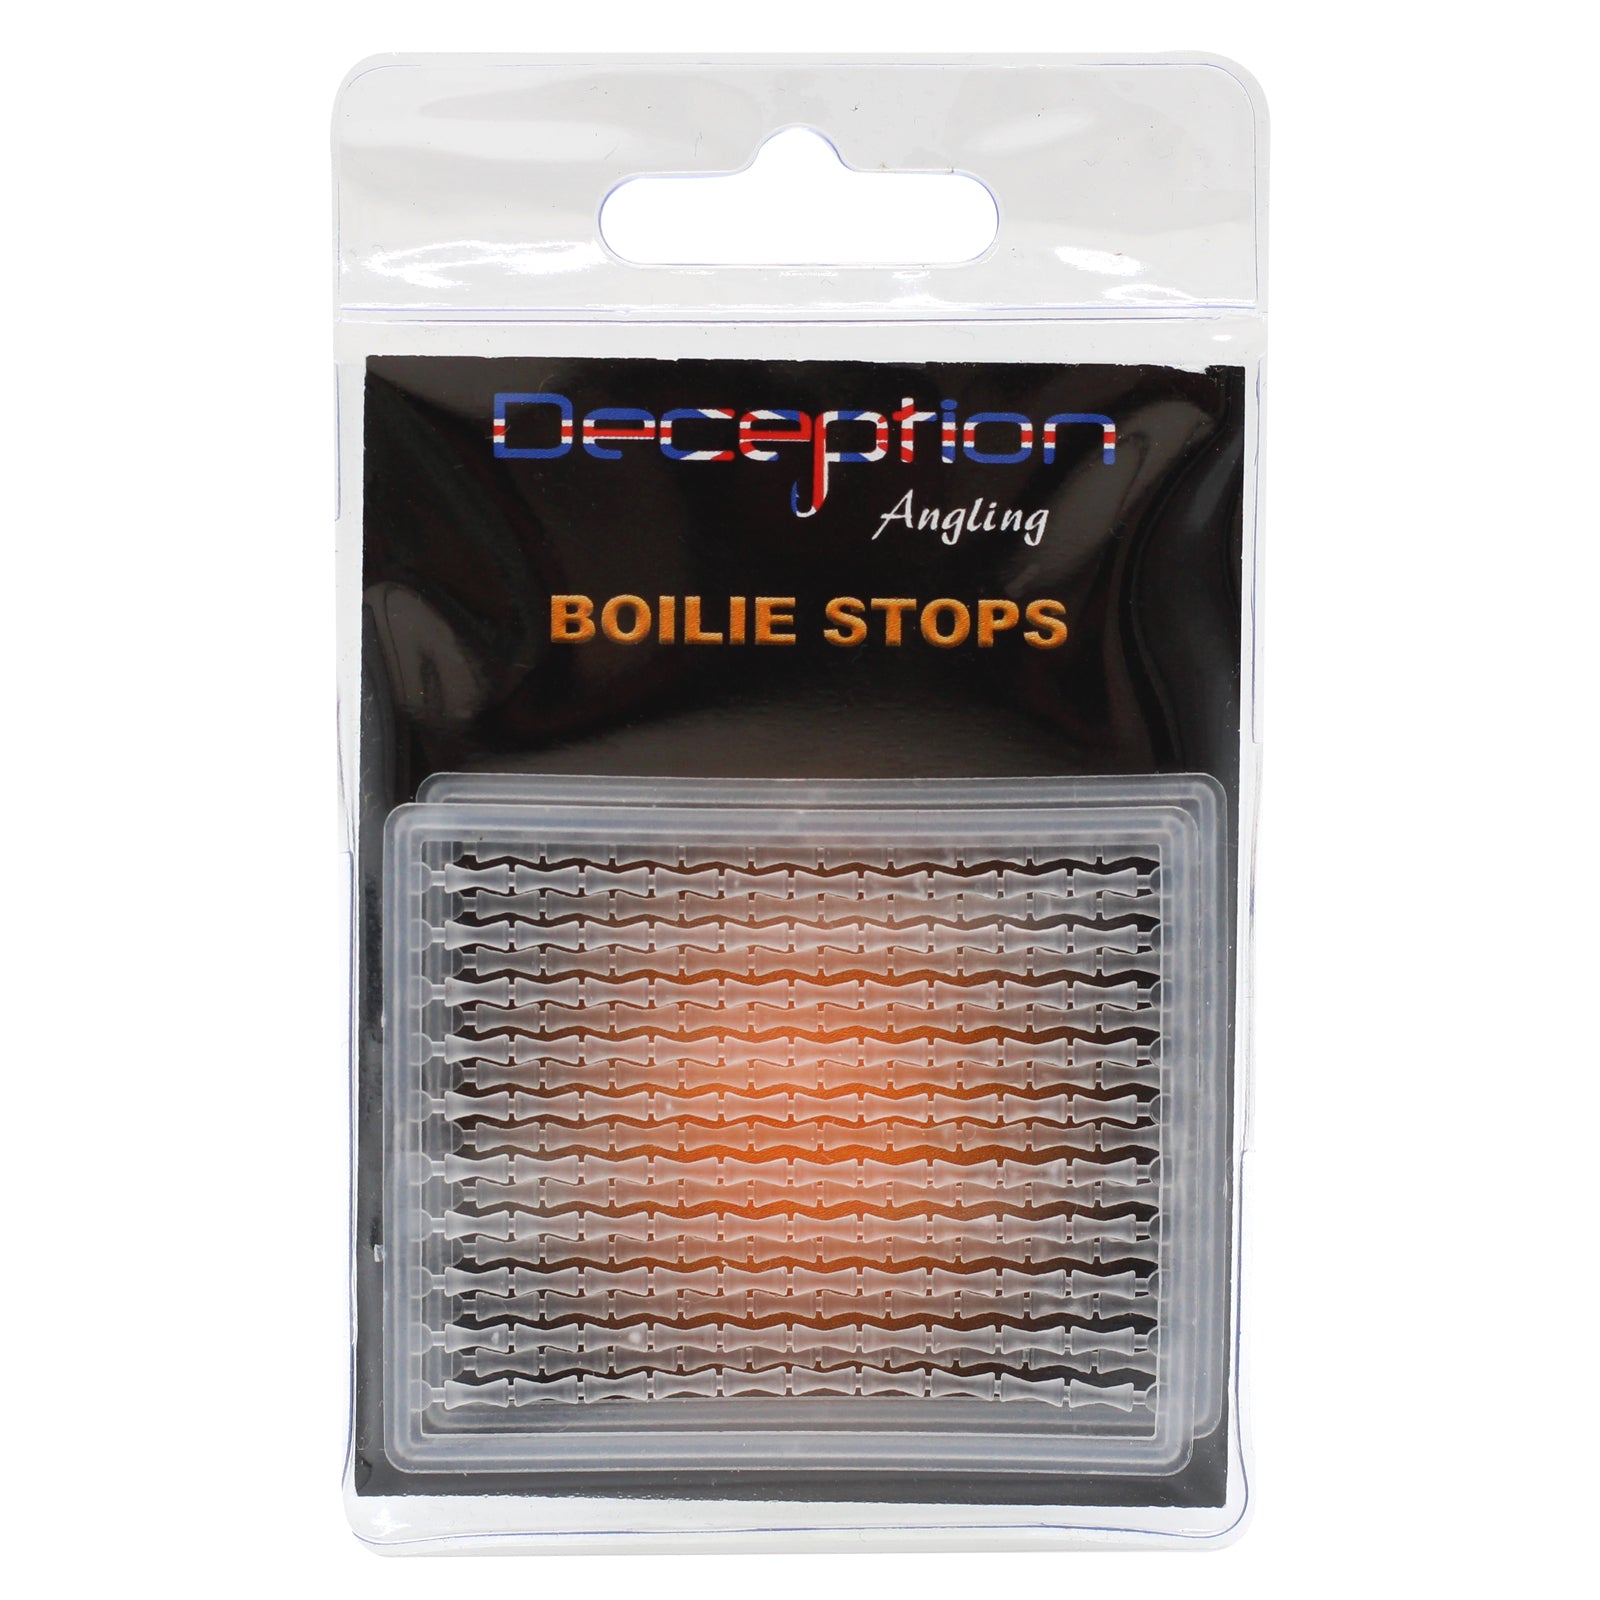 Deception Angling Boilie Stops for Fishing Pack of 2